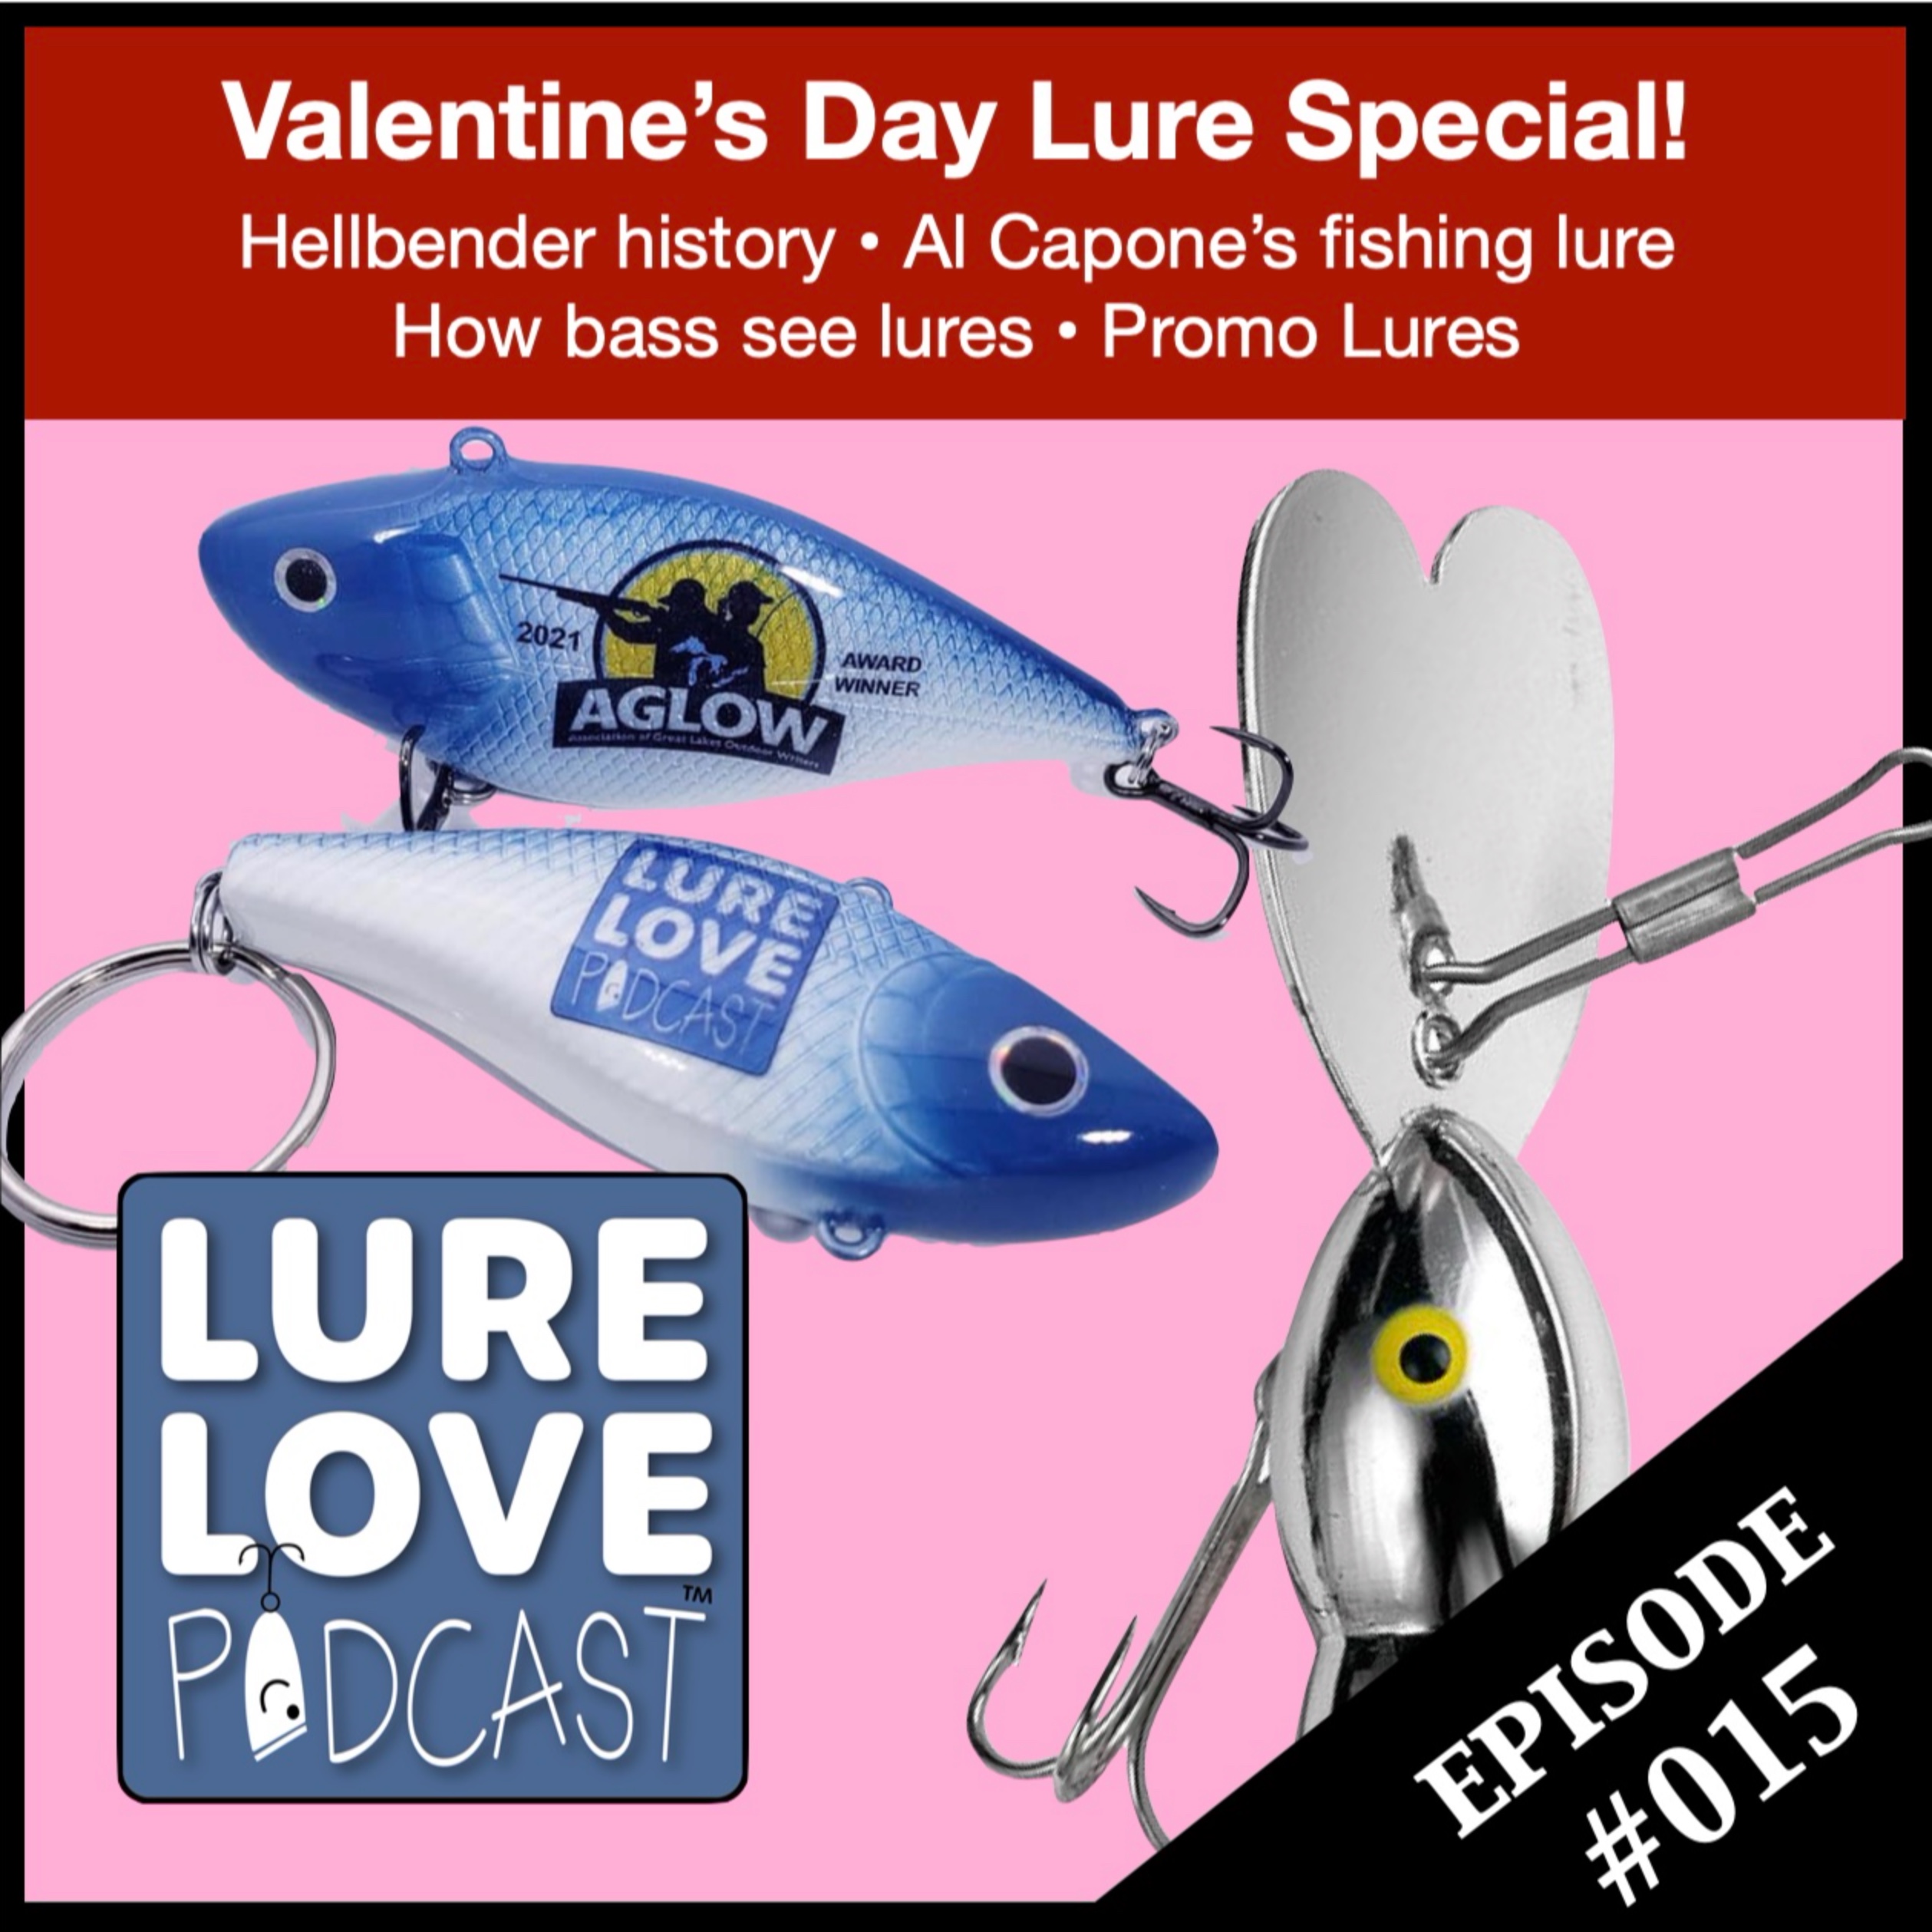 Valentine’s Day Lure Special! Image